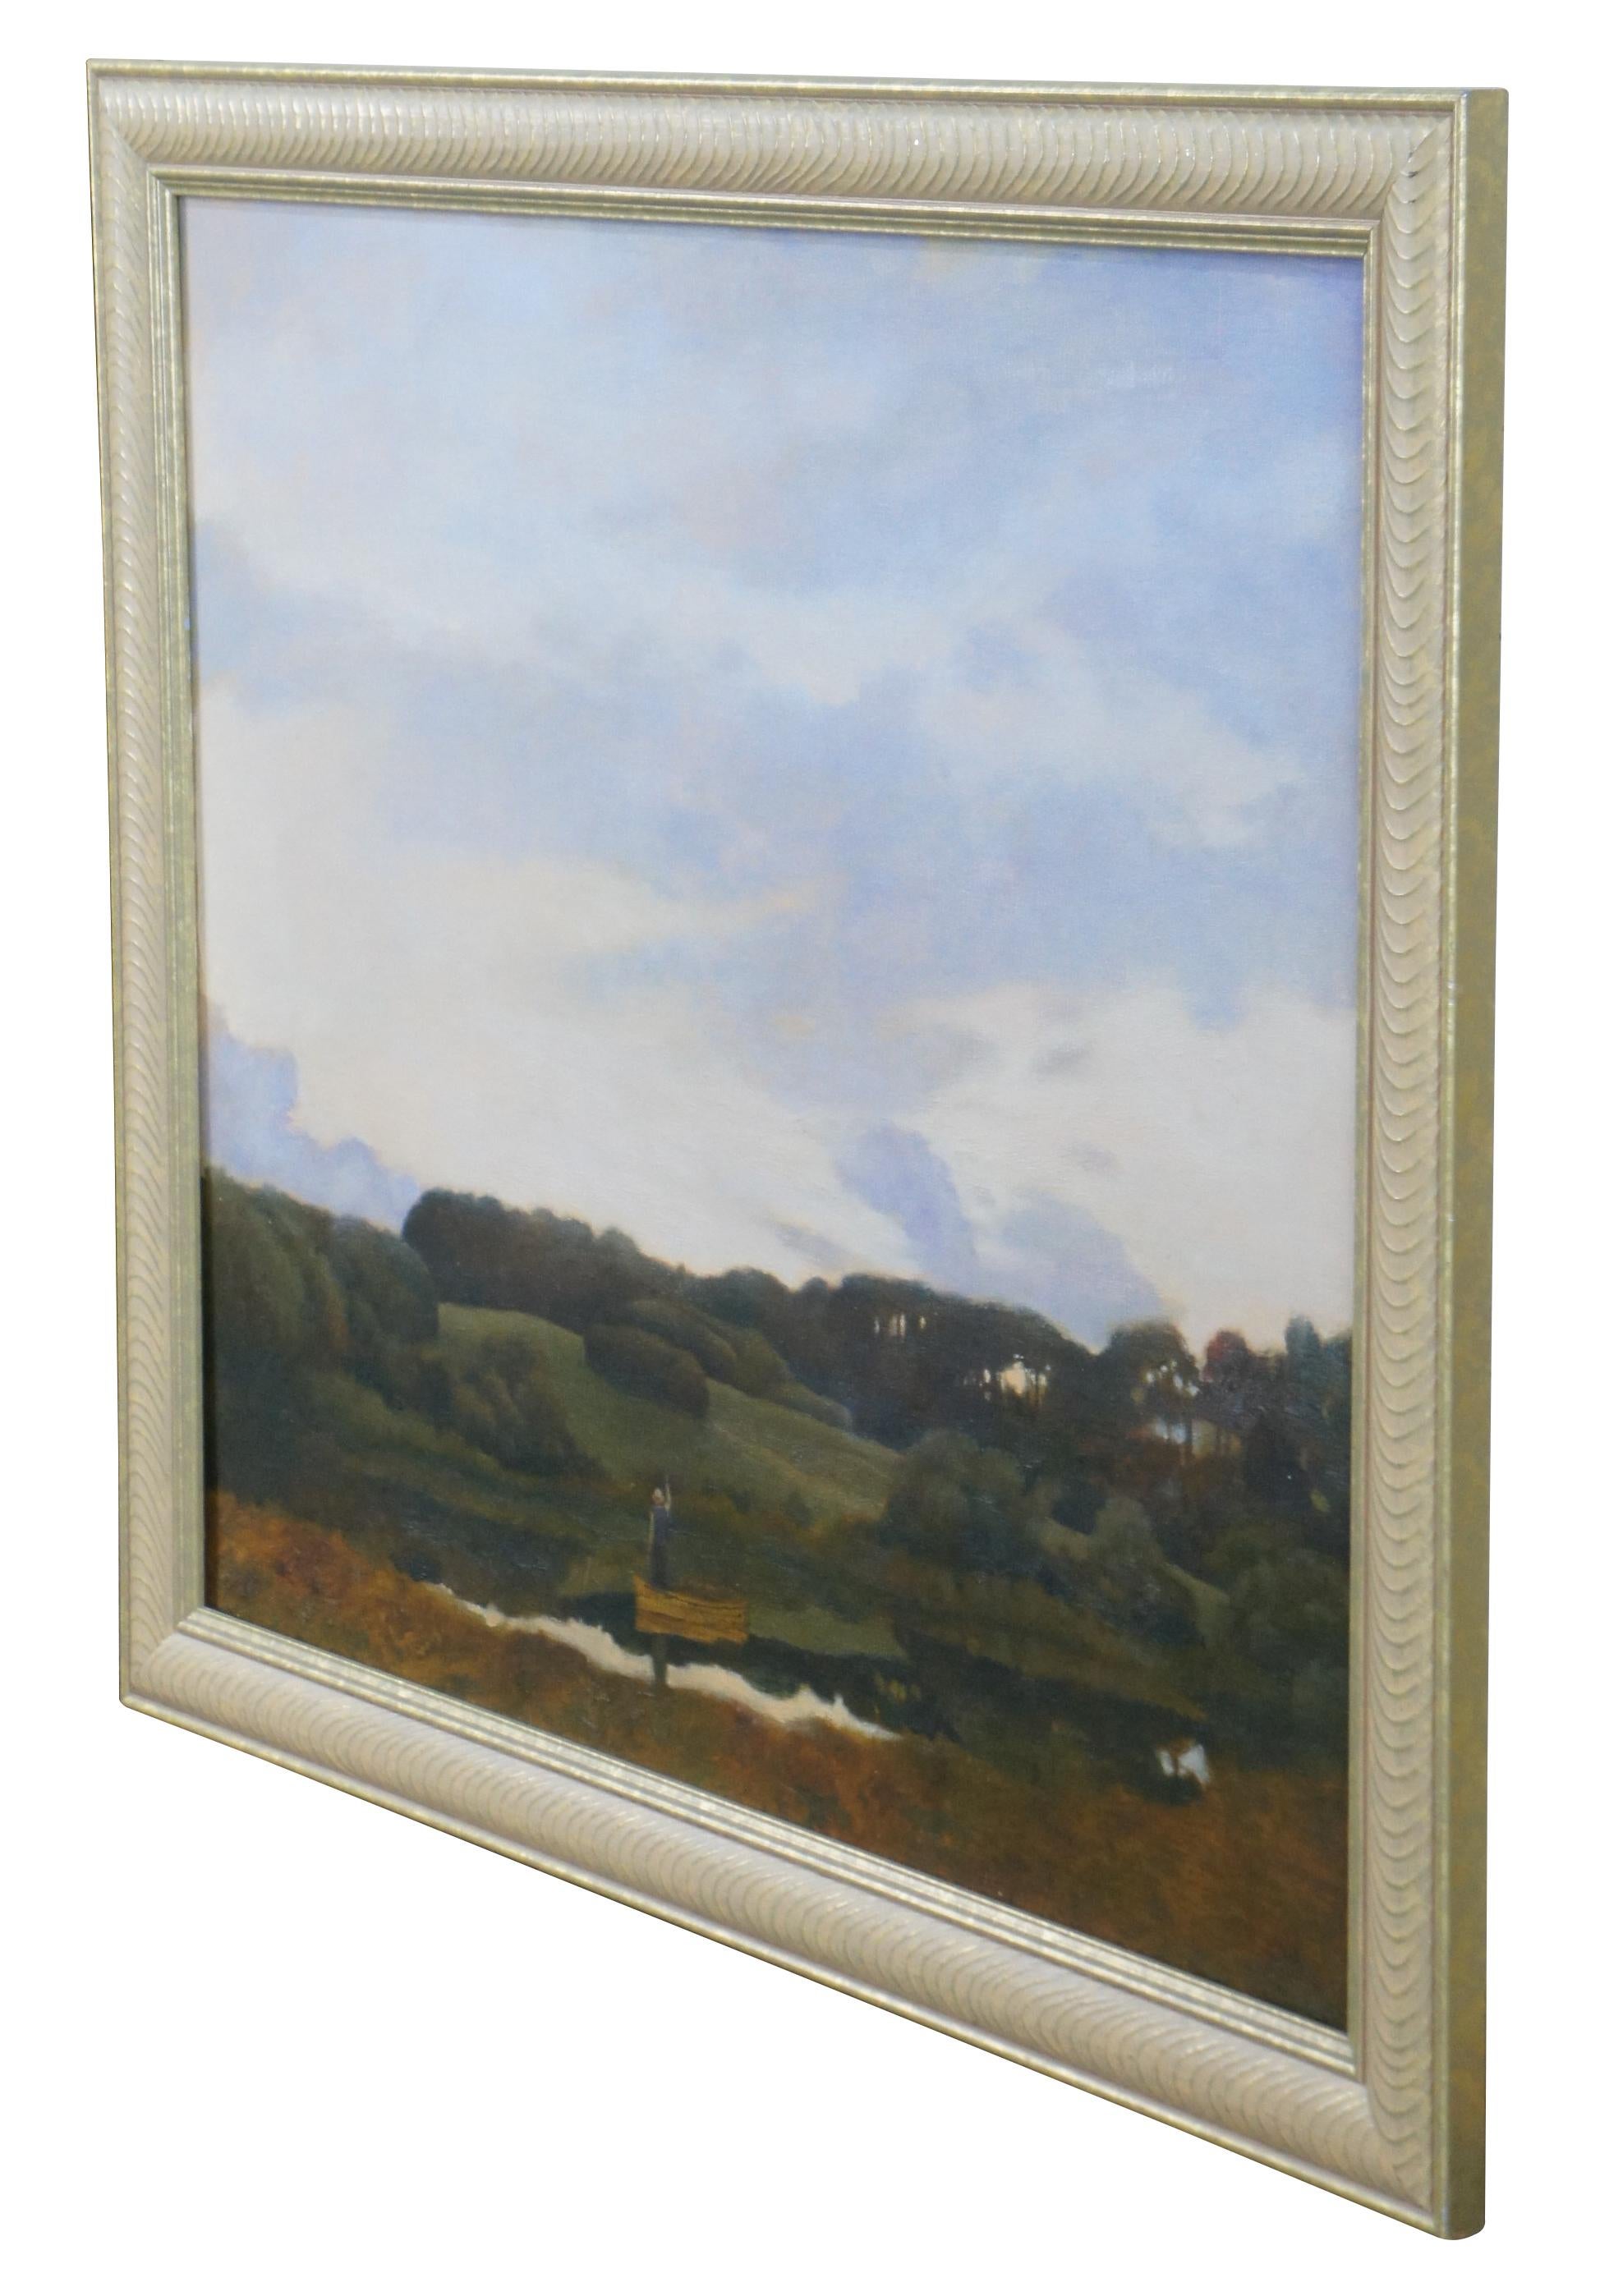 Vintage Ronald Renmark oil painting on canvas featuring an untouched natural landscape of a lake with a man standing and waving on a john boat / canoe, surrounded by a field of trees, hills and blue sky. From an undisclosed location in Virginia.